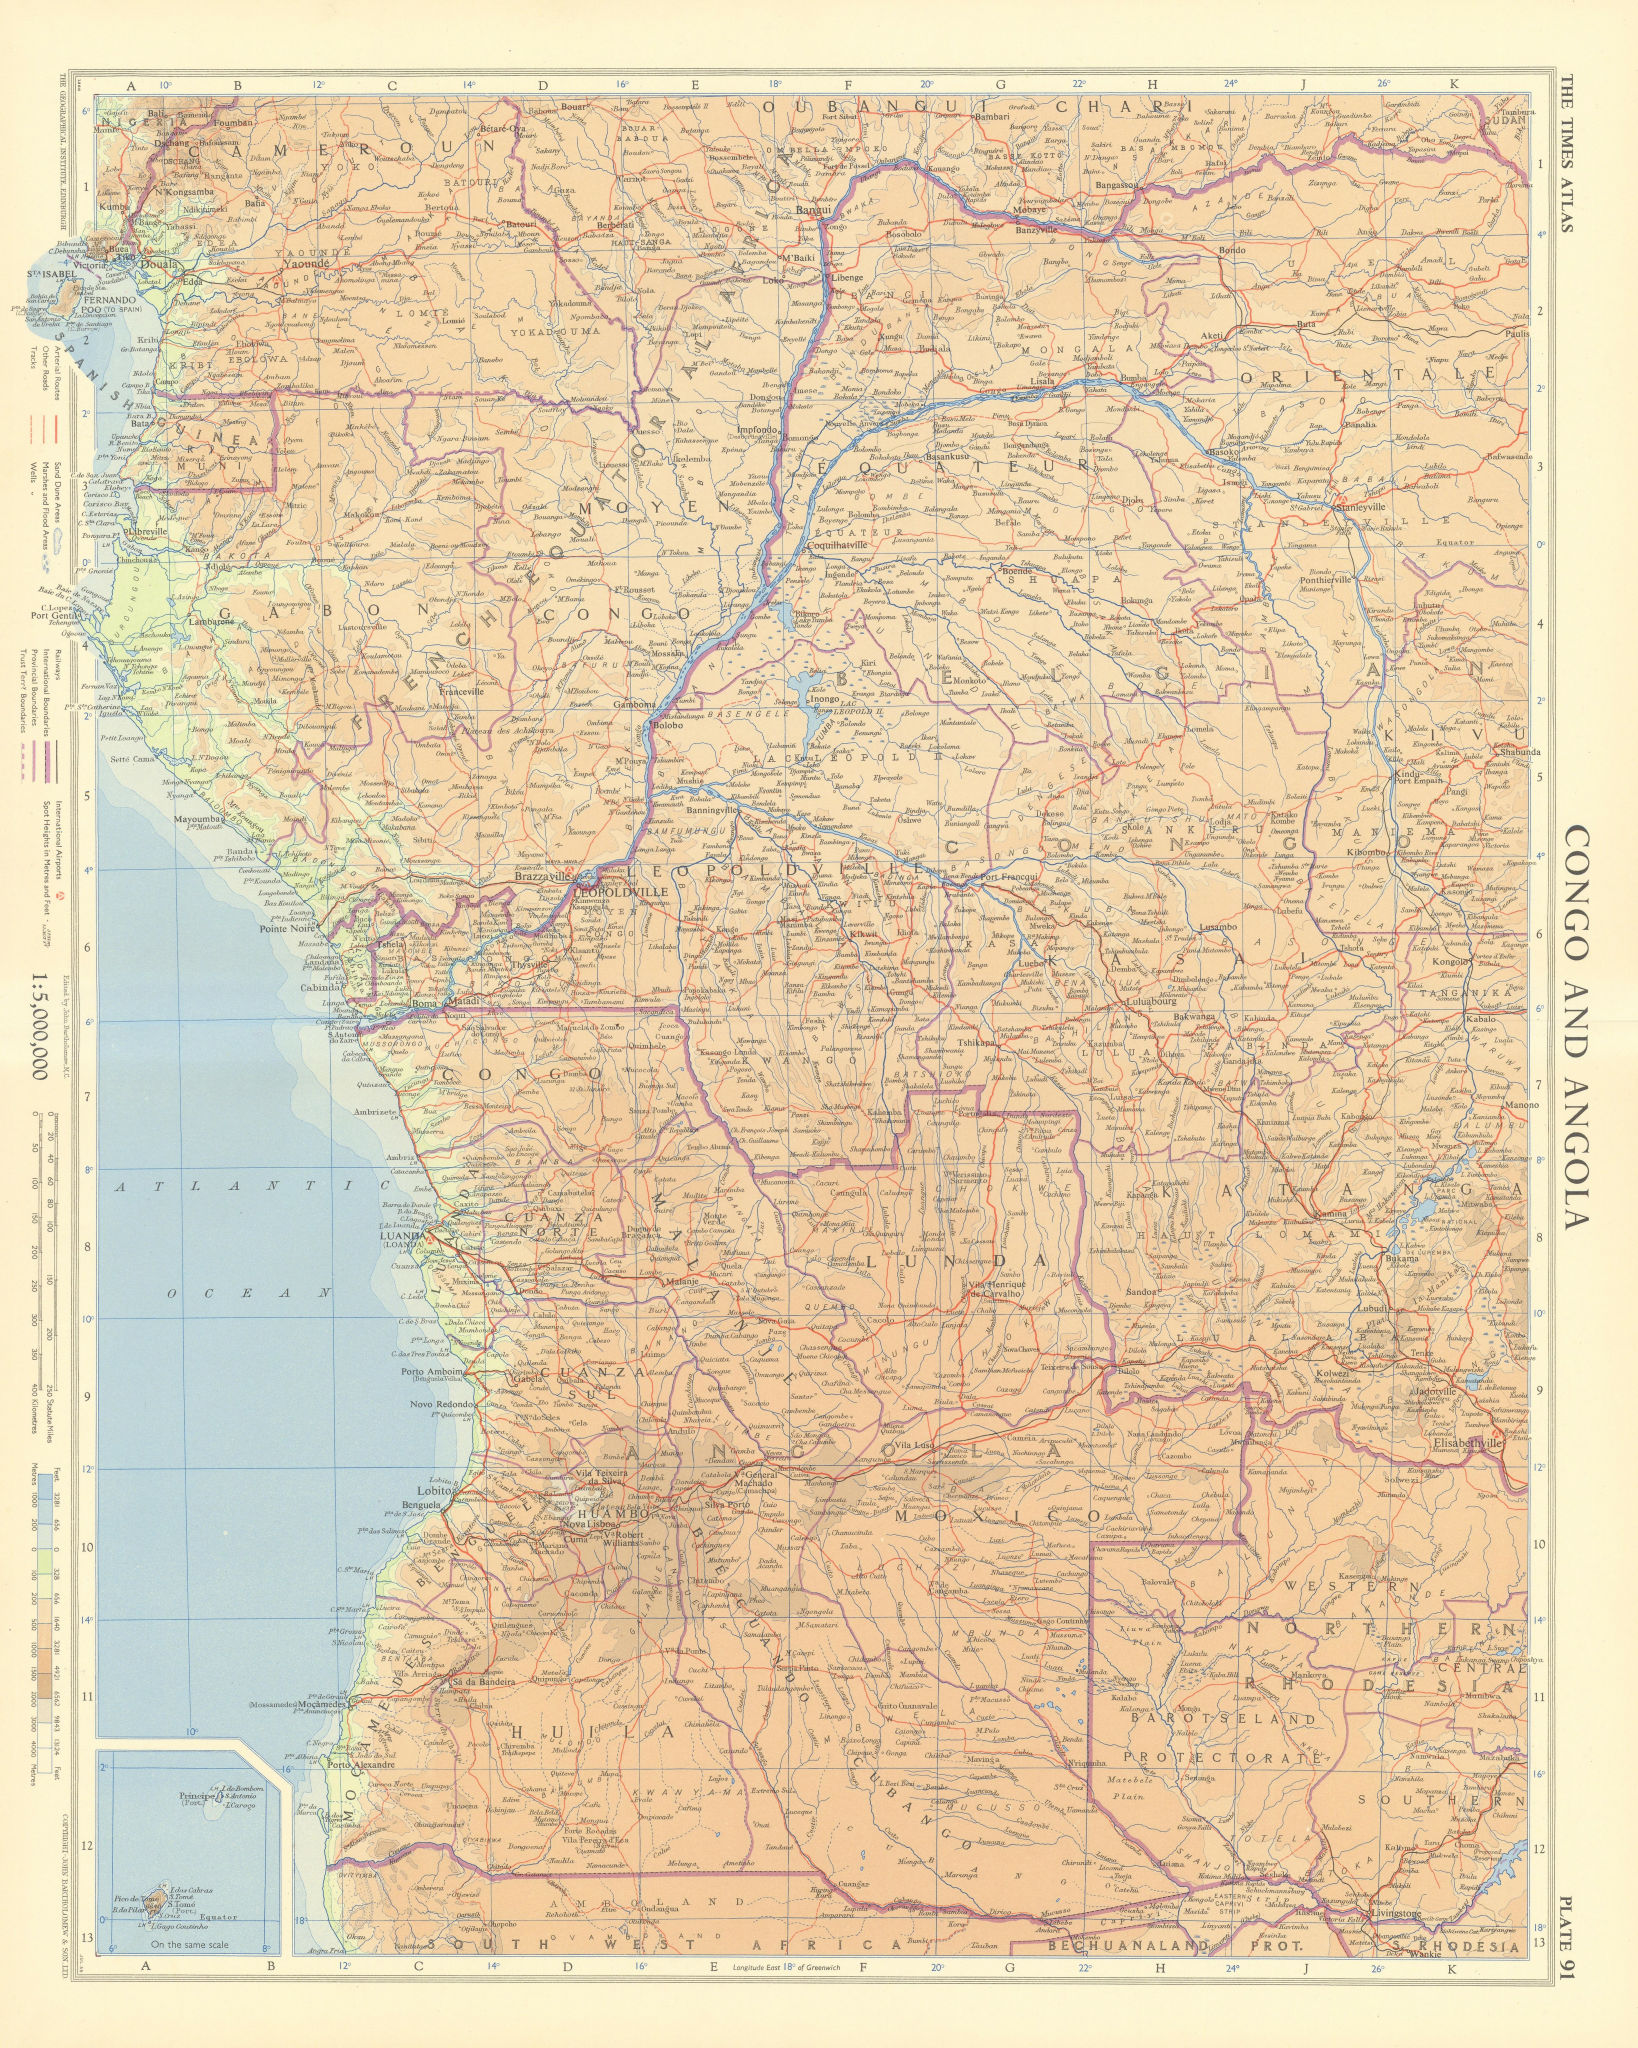 Southwest Africa. Belgian Congo Angola French Equatorial Africa. TIMES 1956 map